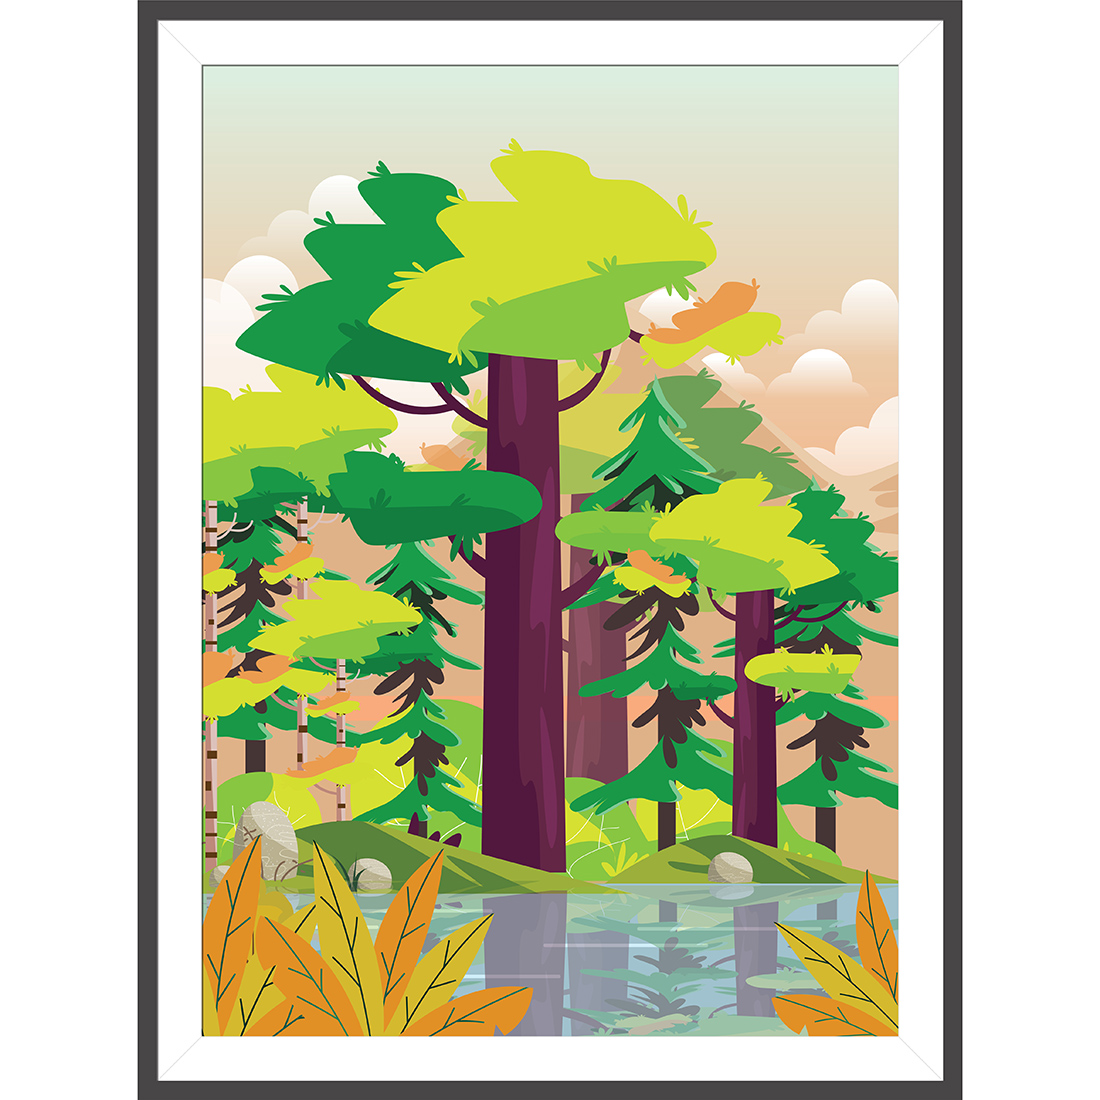 Pine forest cover image.